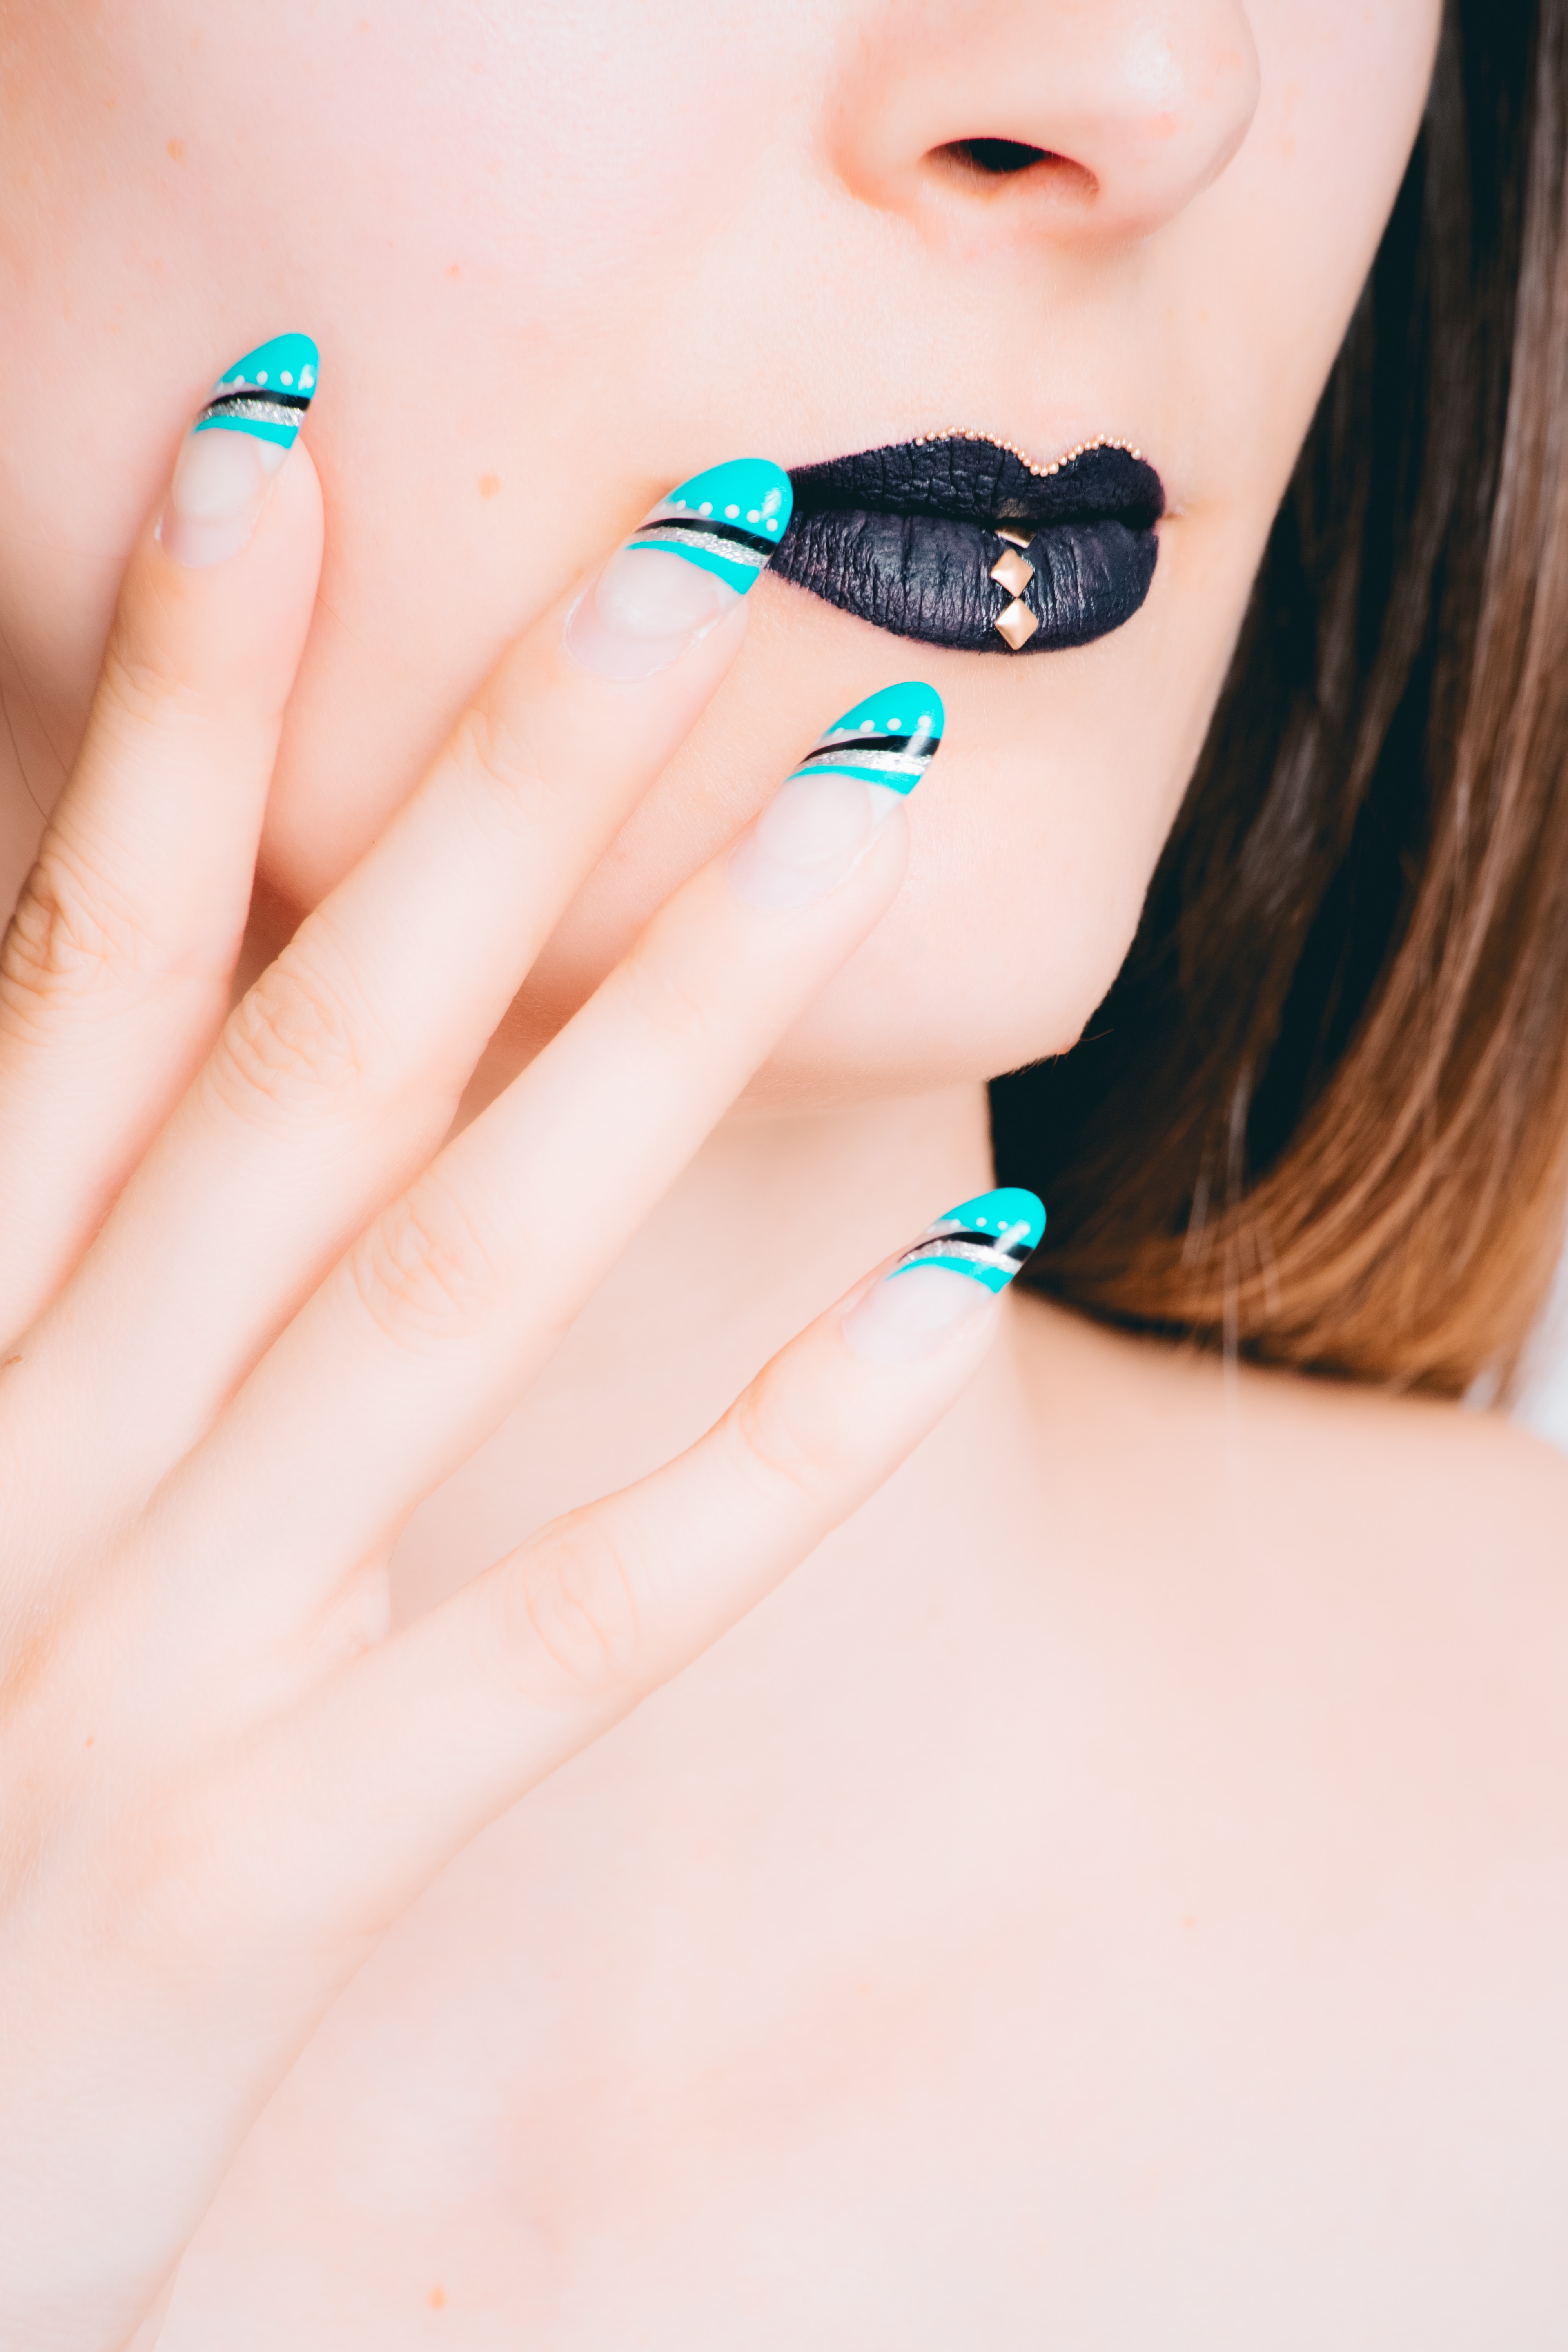 Woman with black lipstick and teal manicure photo